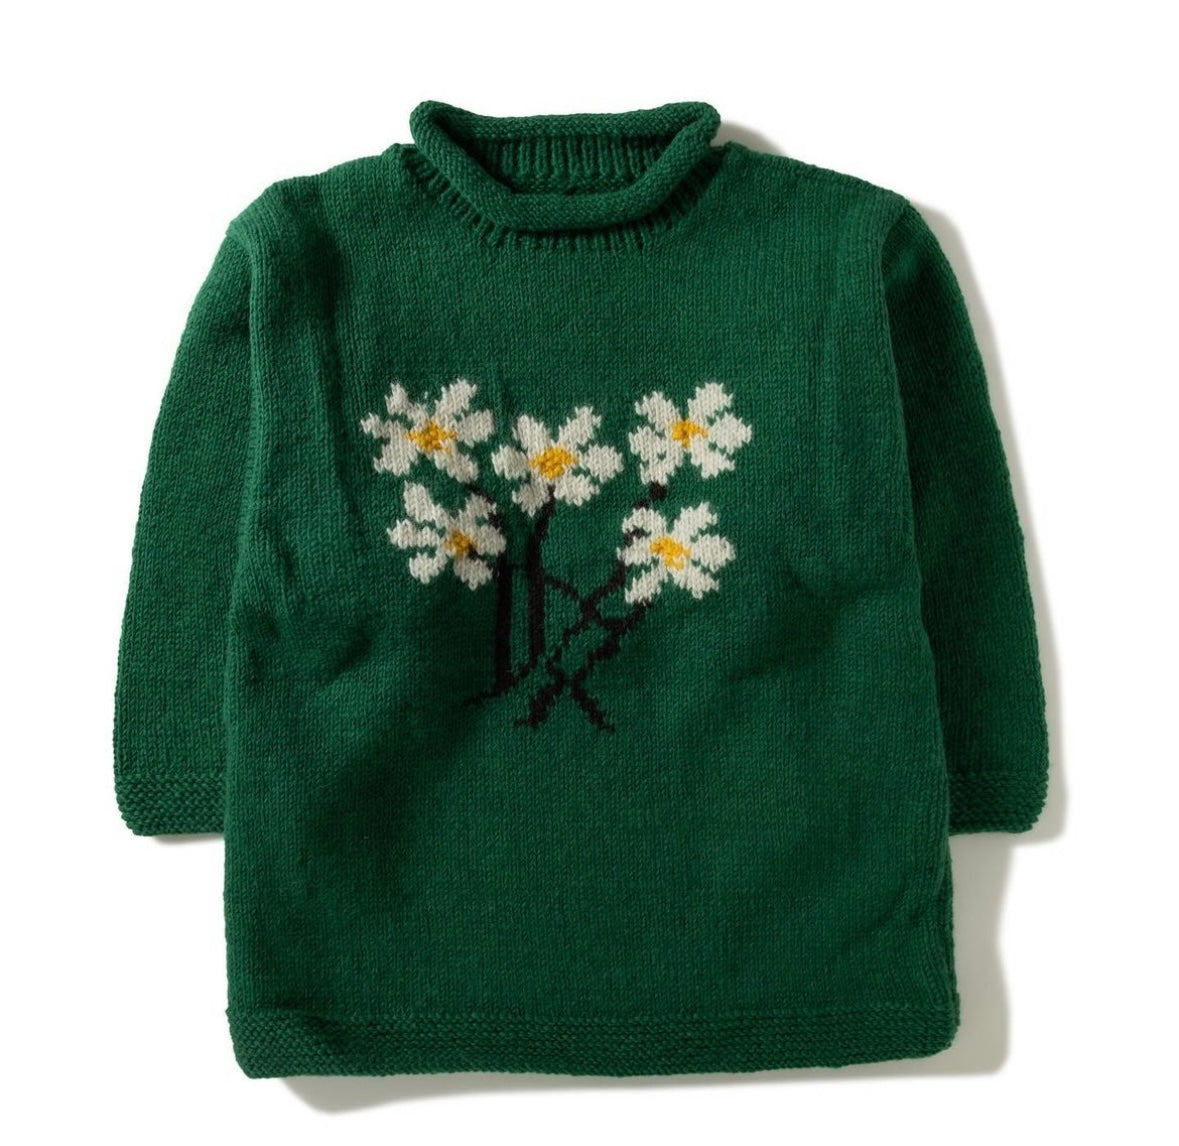 MacMahon Knitting Mills Roll Neck Knit 5Flowers